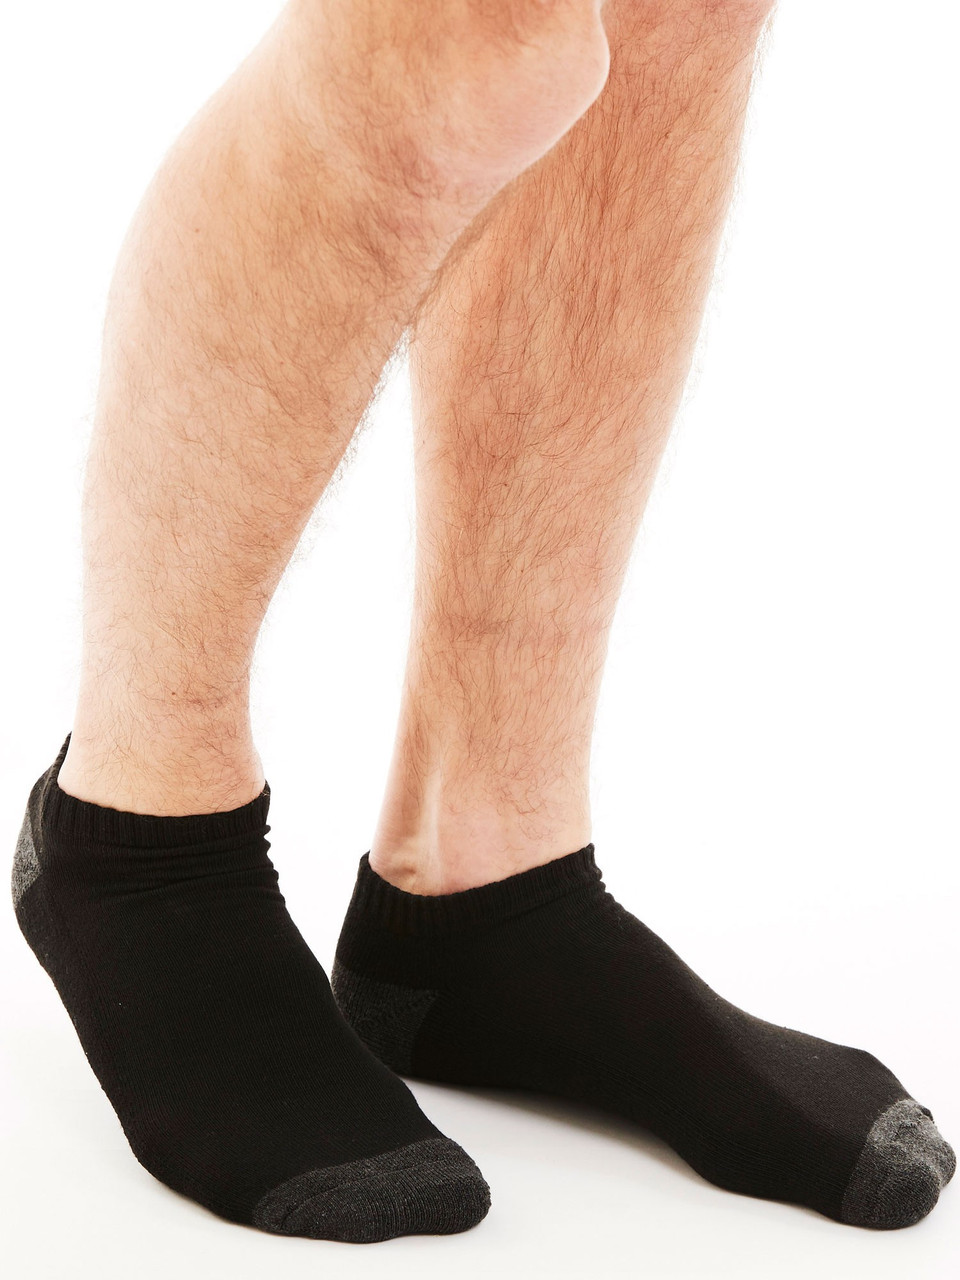 Breathable Mesh Bamboo Low Cut Ankle Socks - EcoSox